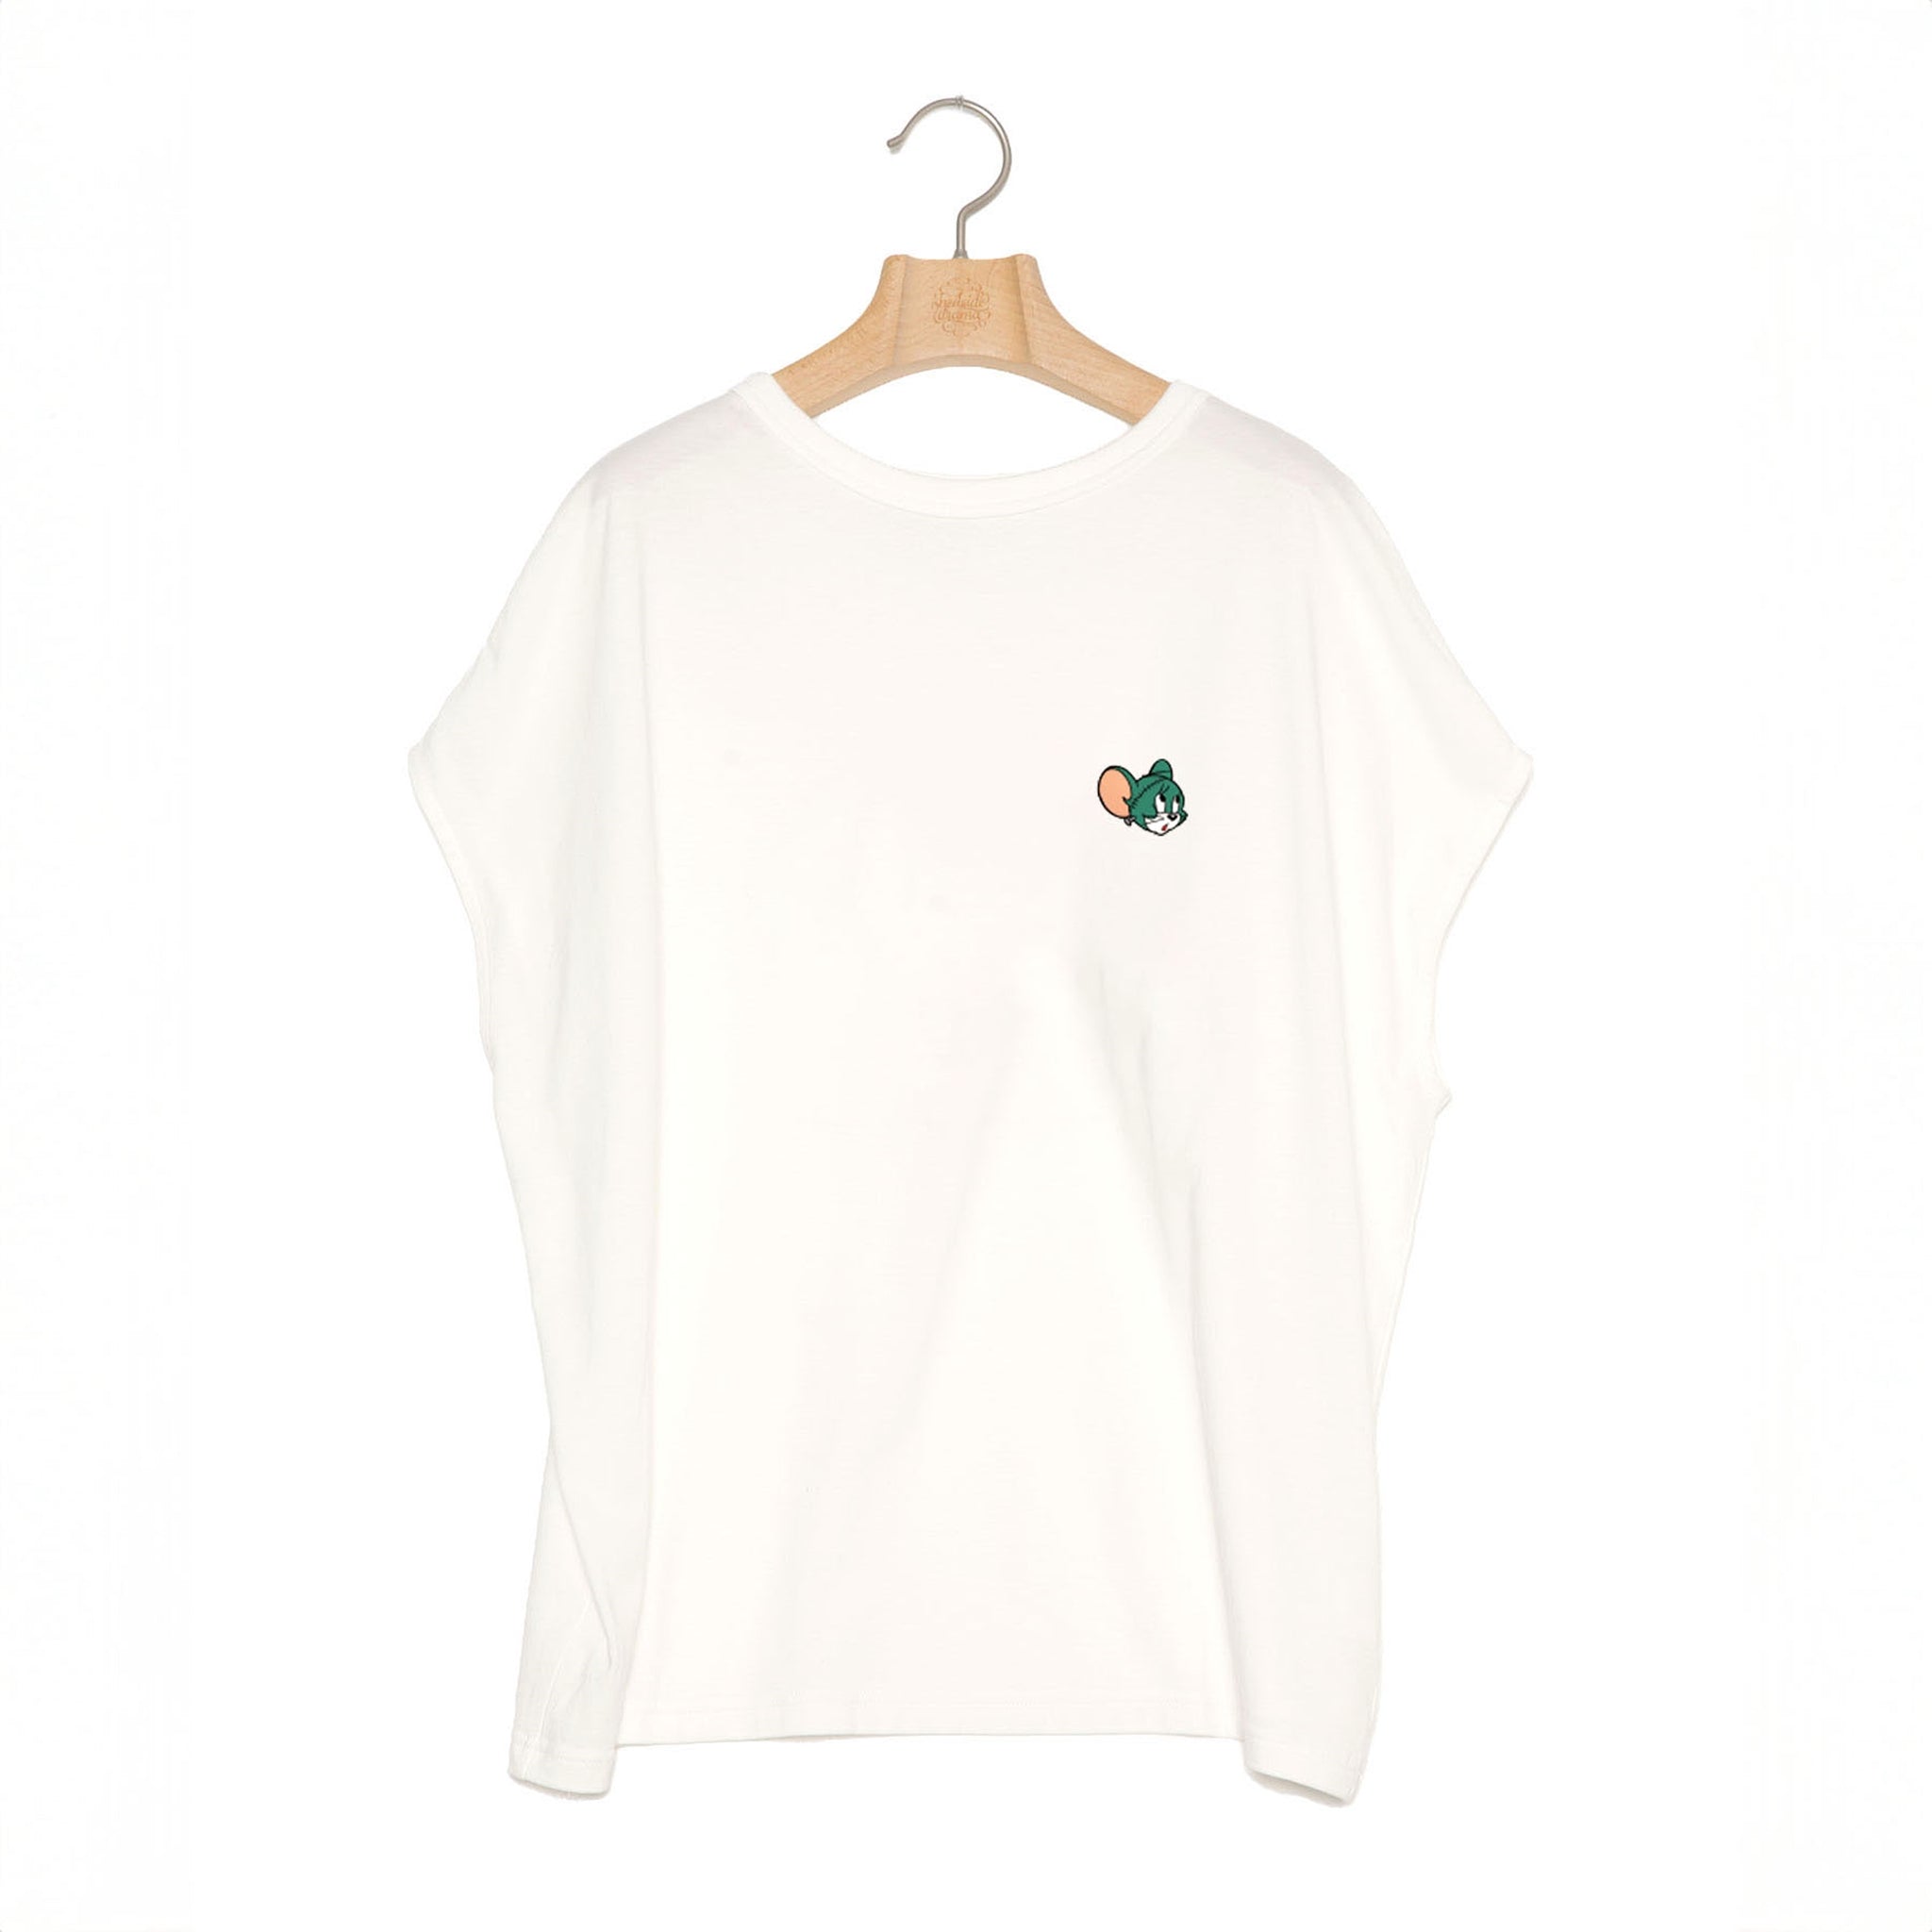 No:bsd24SS-19DW | Name:UnKnown Tee/Zombie mouse | Color:White【BEDSIDEDRAMA_ベッドサイドドラマ】